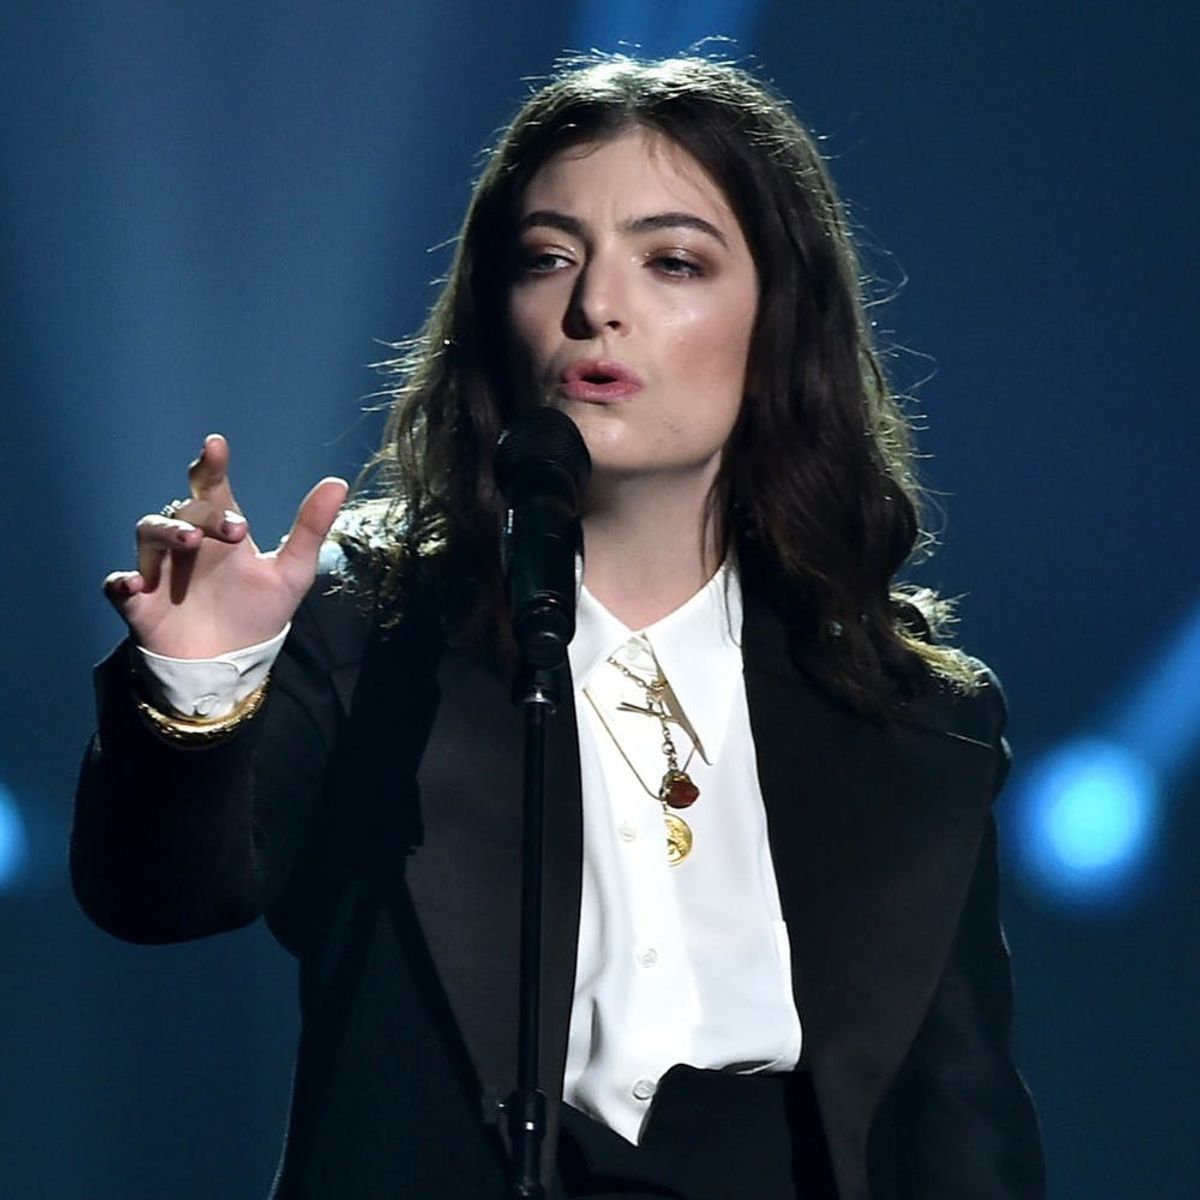 Is This Why Lorde Isn’t Performing at the 2018 Grammys?